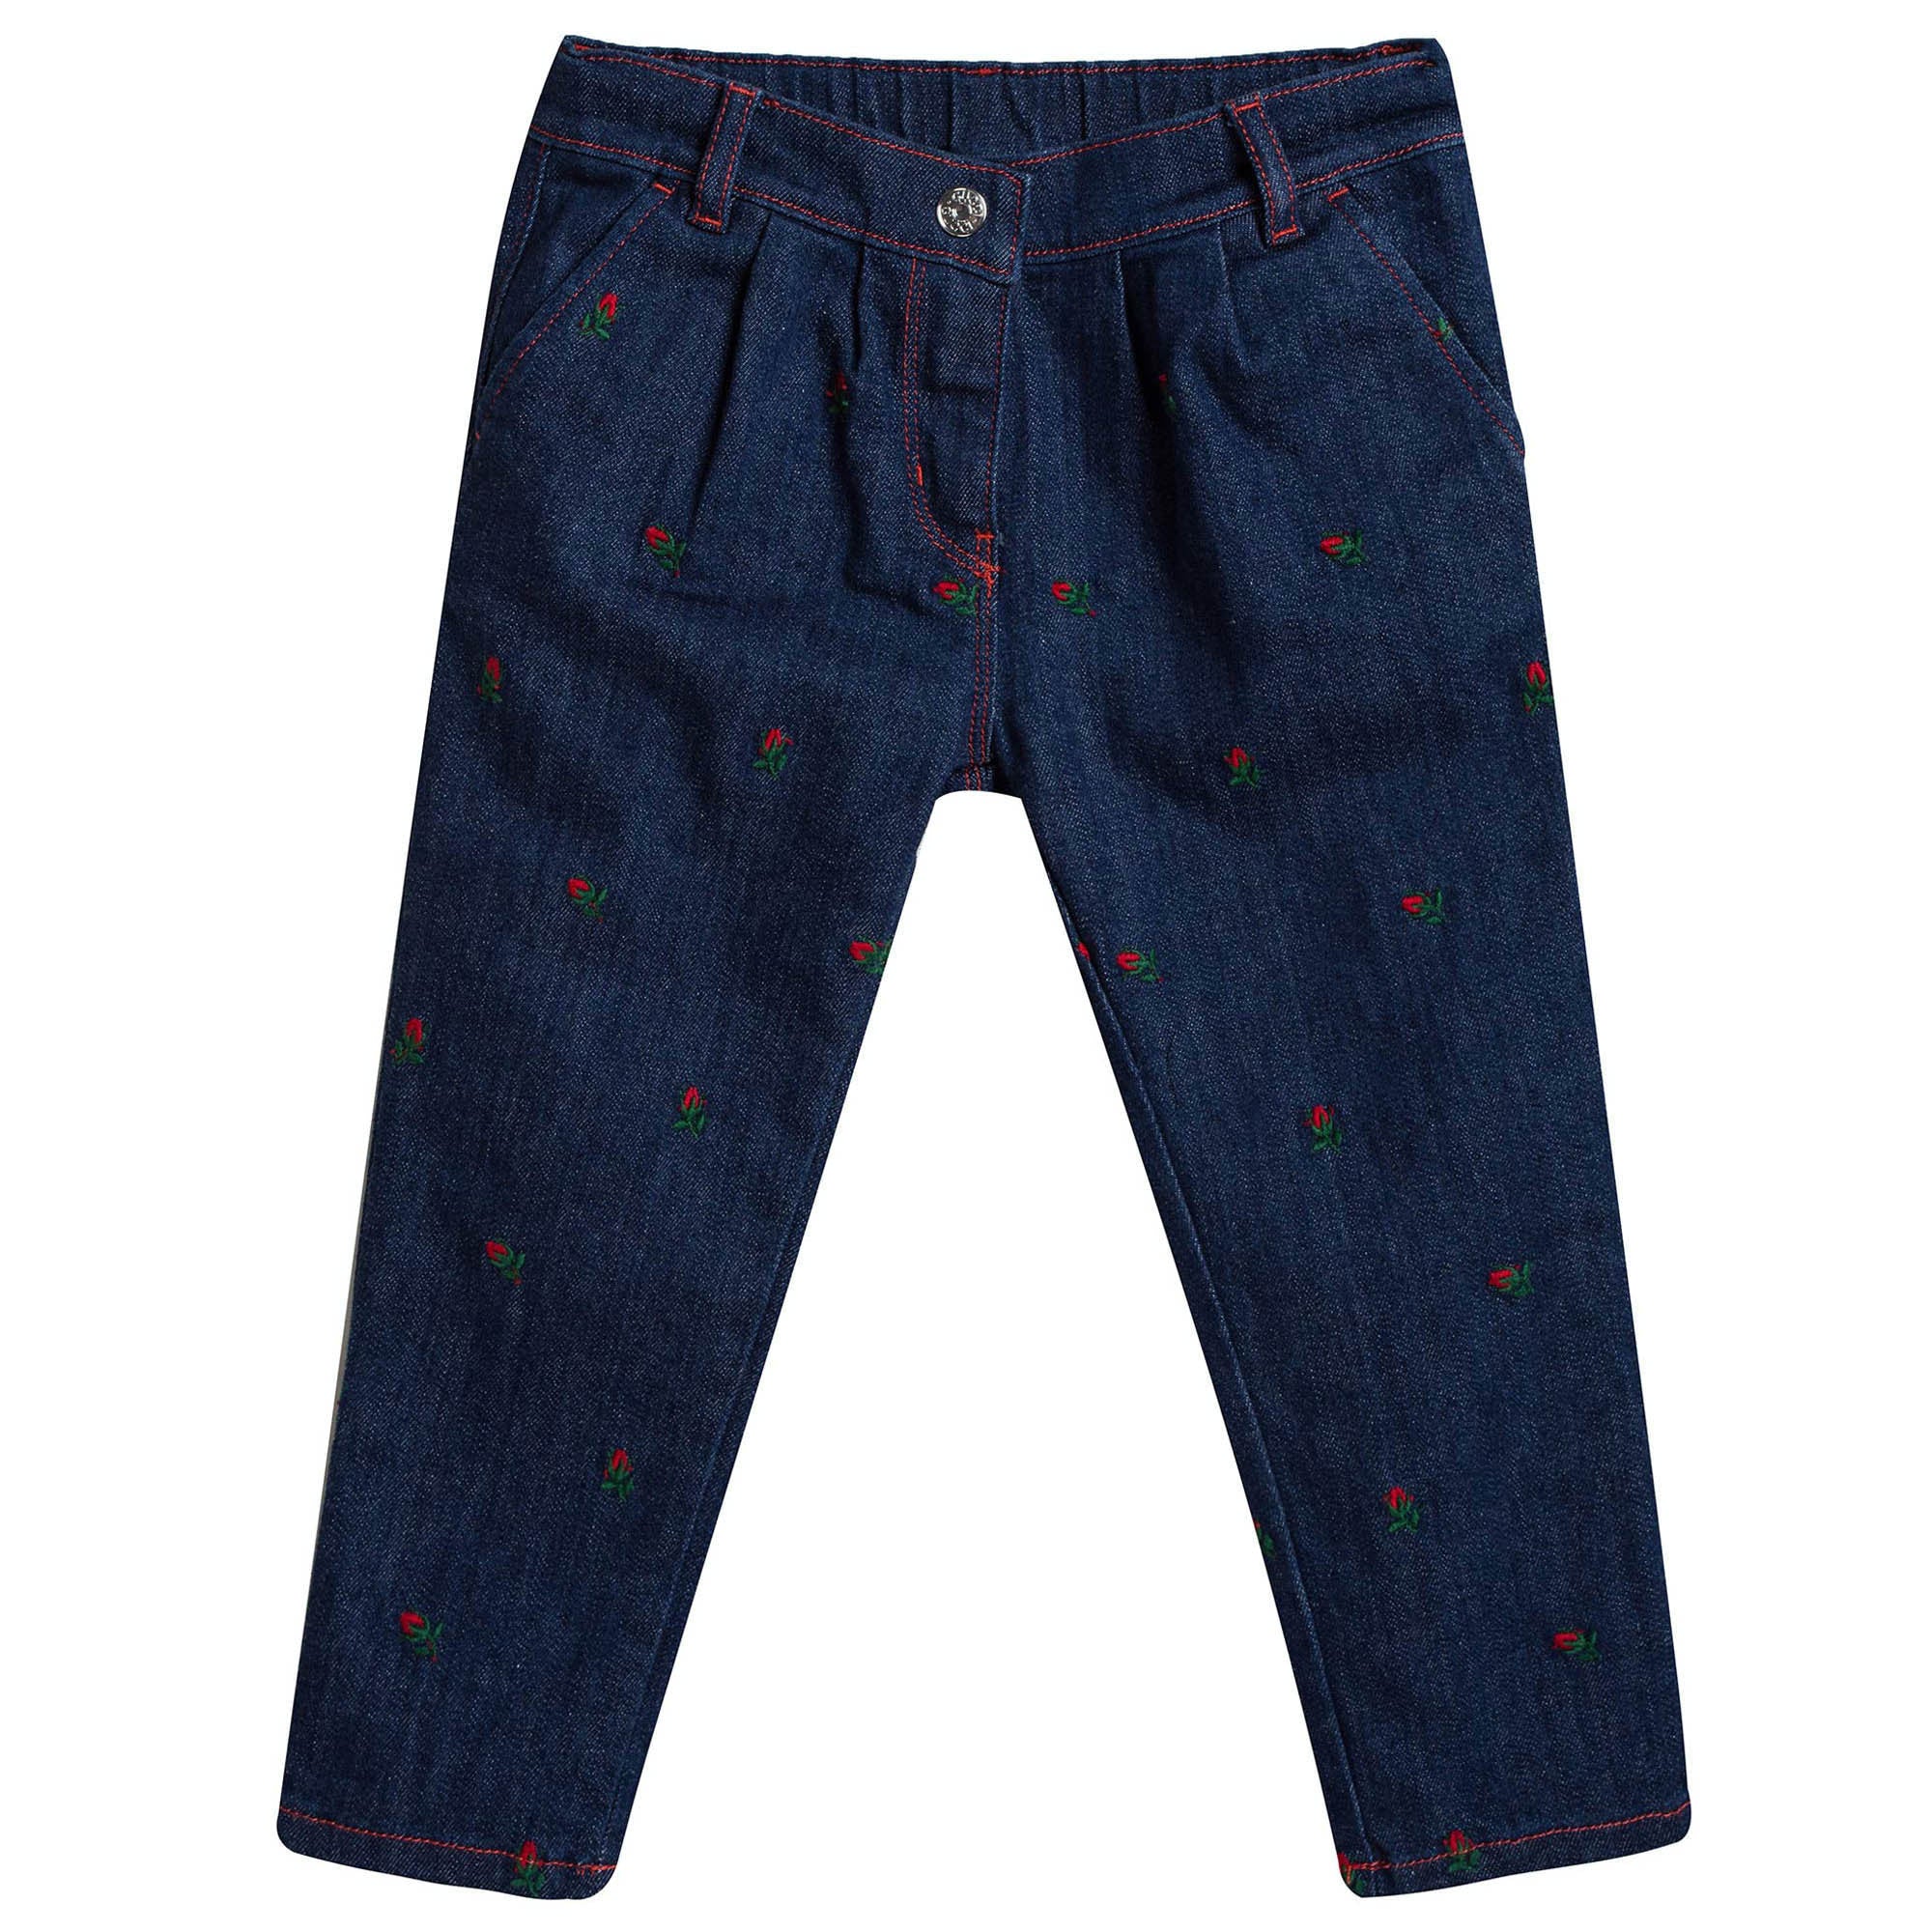 Baby Girls Blue Denim Jeans With Red Embroidered Flower Trims - CÉMAROSE | Children's Fashion Store - 1